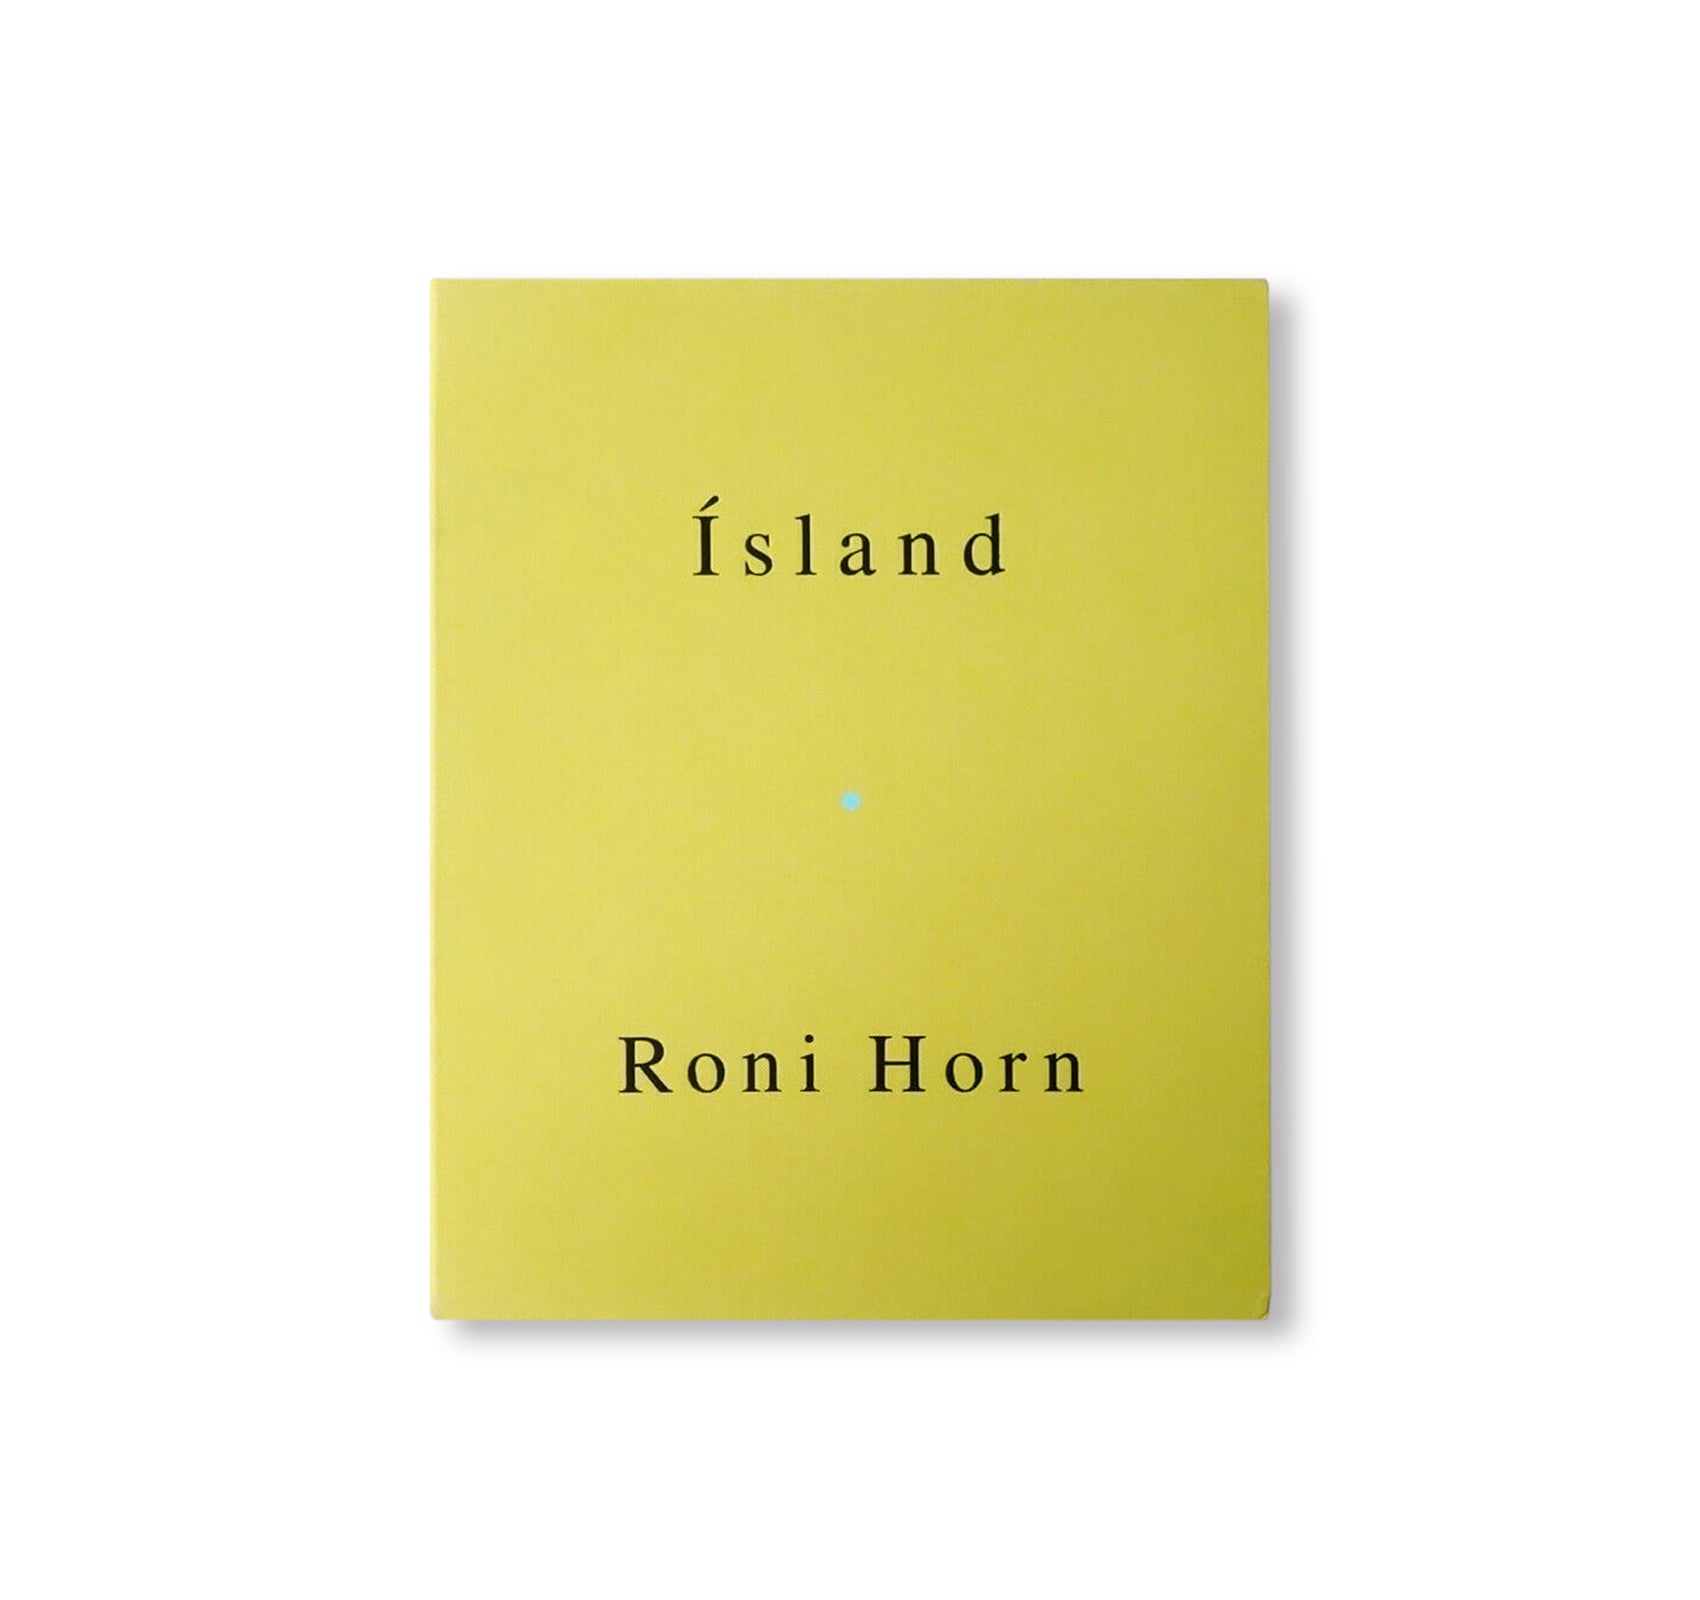 ISLAND: TO PLACE - BECOMING A LANDSCAPE by Roni Horn